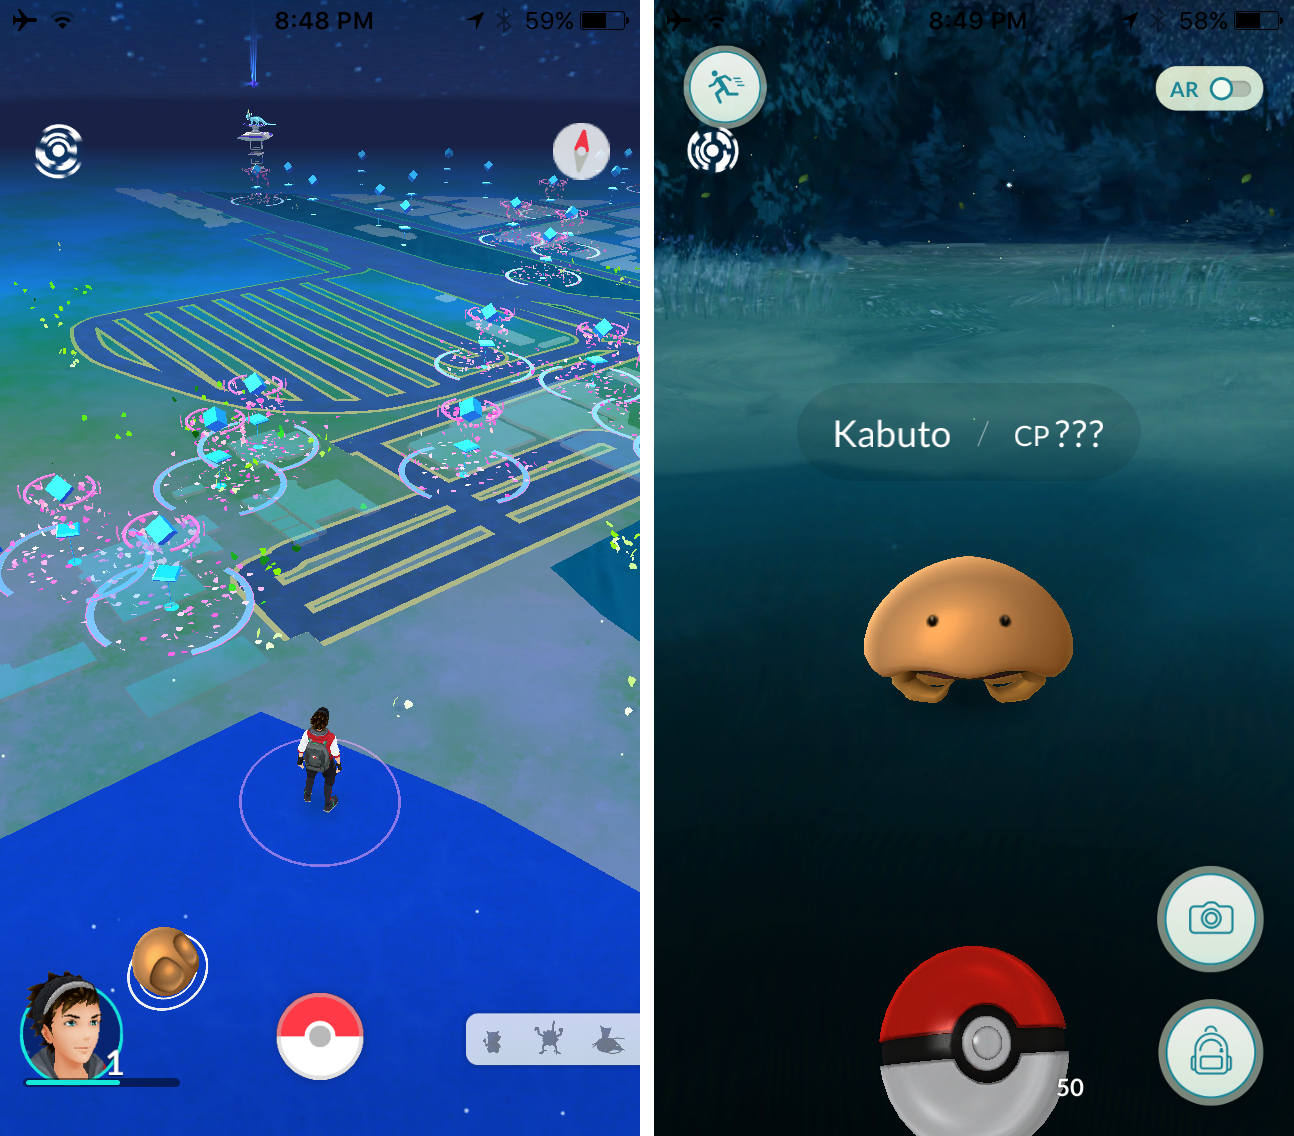 gps spoofing pokemon go android